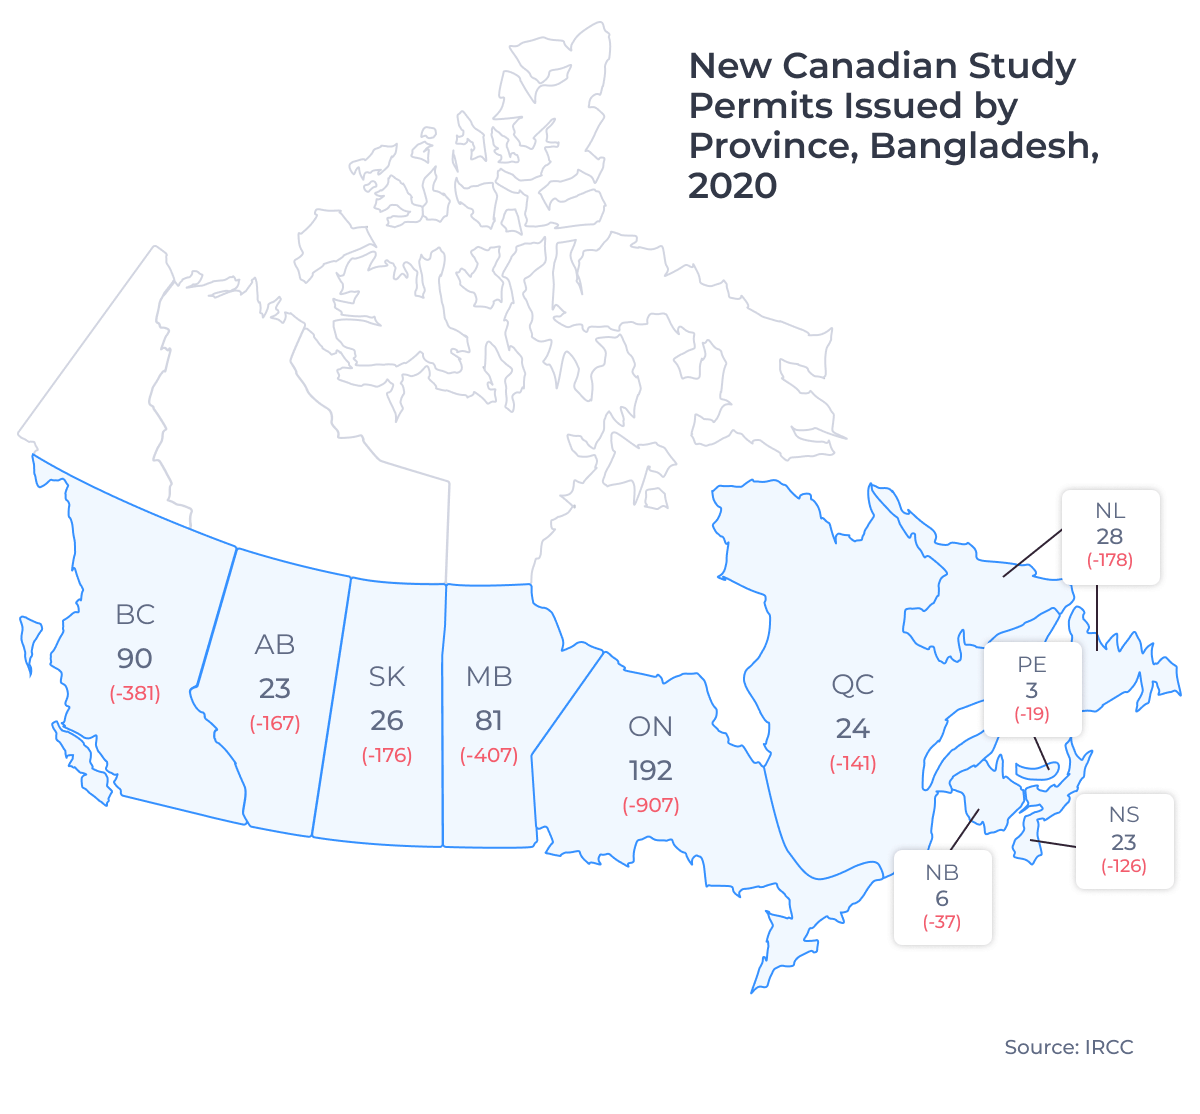 New Canadian Study Permits Issued by Province, Bangladesh, 2020